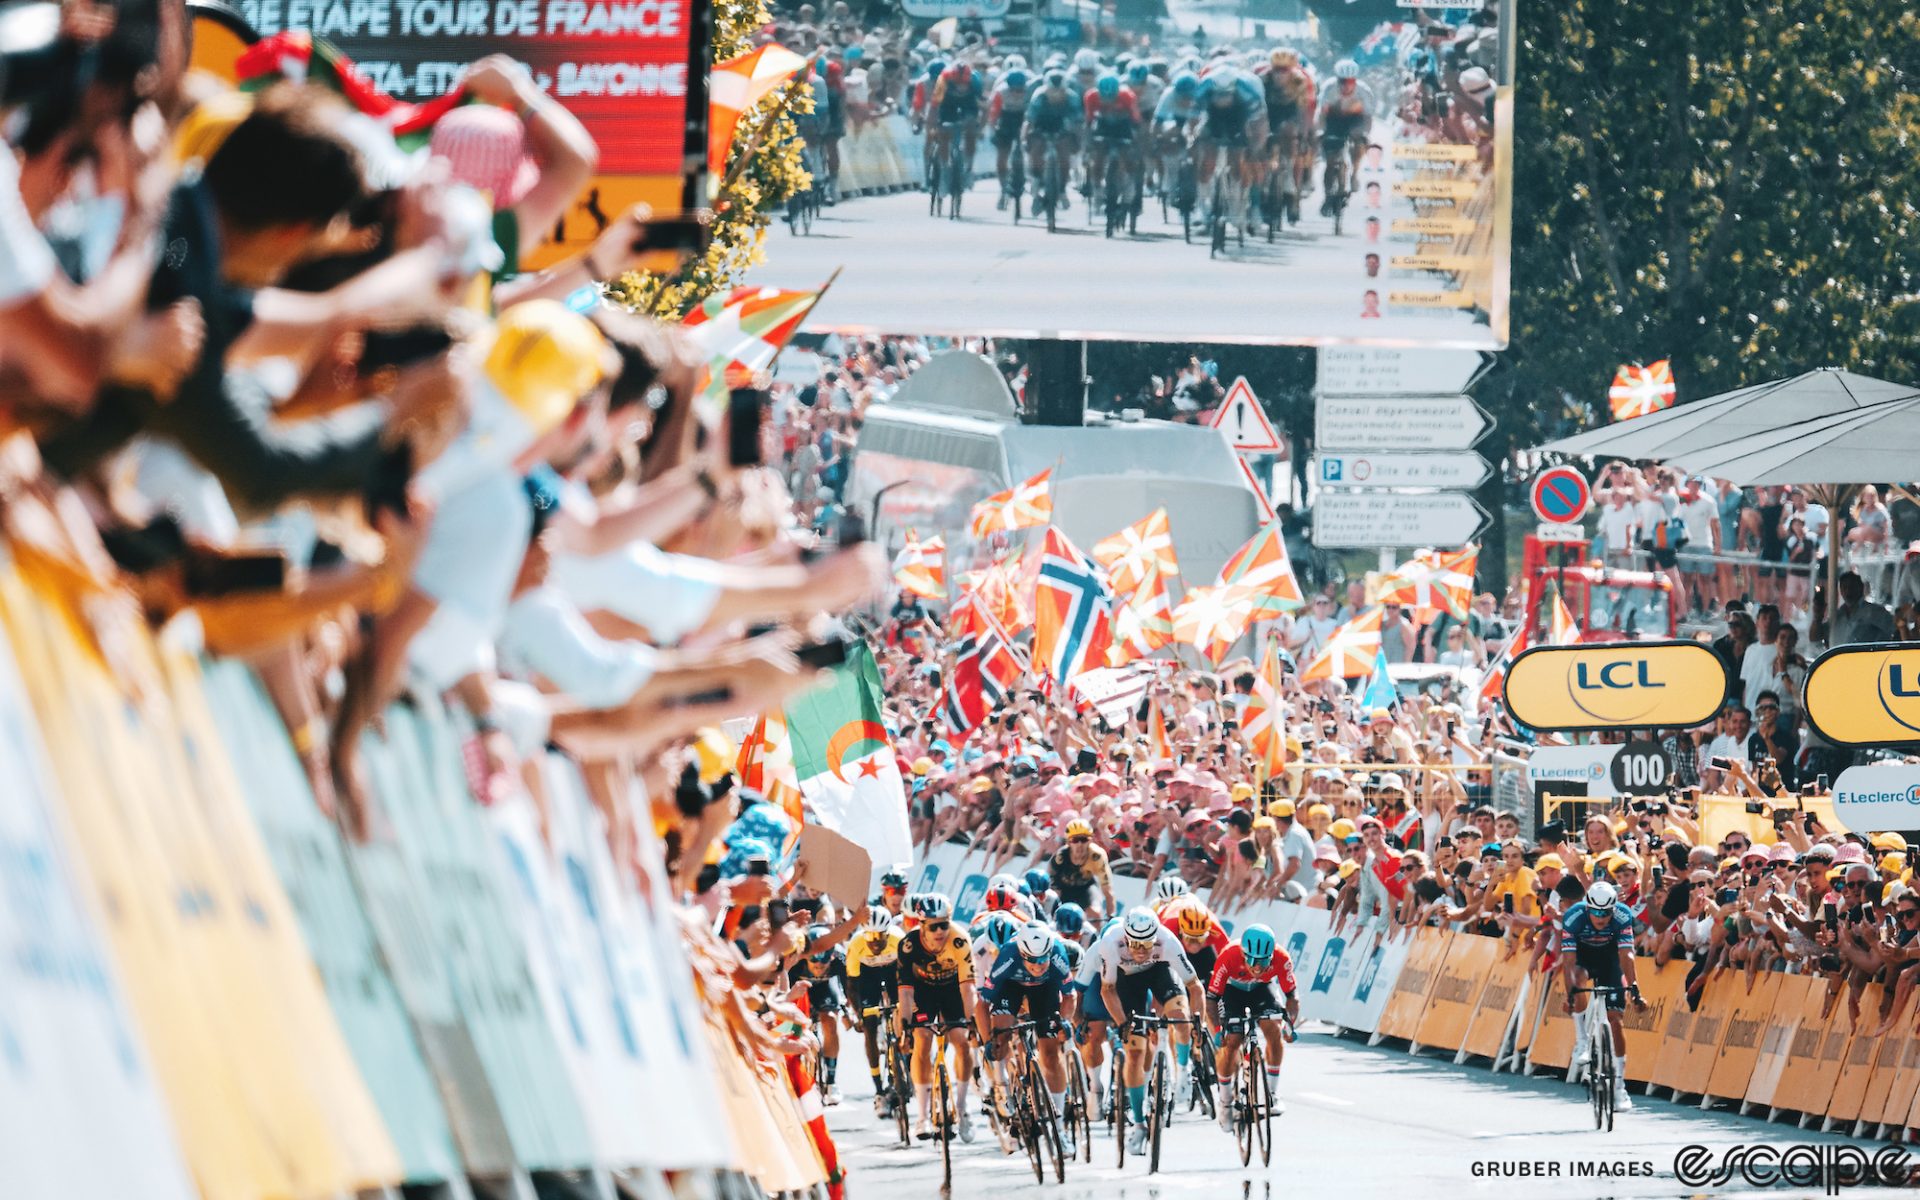 The Tour de France peloton sprints up a shallow rise at the end of the 2023 stage to Bayonne. Fans lean over the barriers and large colorful flags wave behind. Jasper Philipsen and Phil Bauhaus are seen at the front, while off to the right is Philipsen's teammate, Mathieu van der Poel, who has swung off from his leadout.